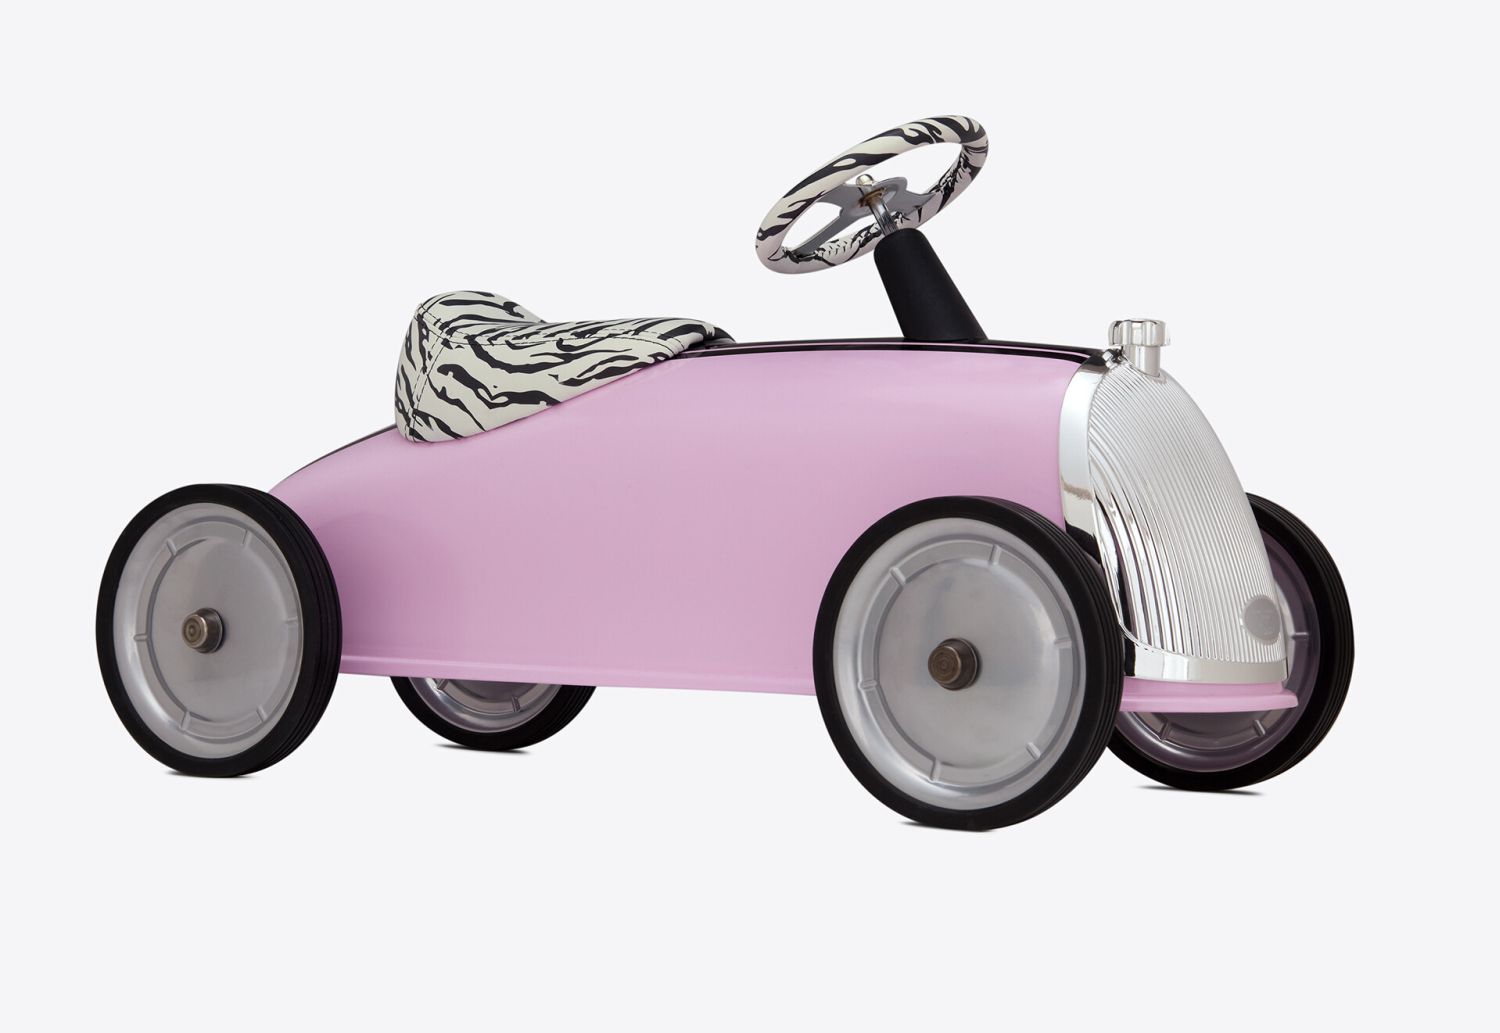 Saint Laurent teams up with Baghera to unveil $1300 toy car